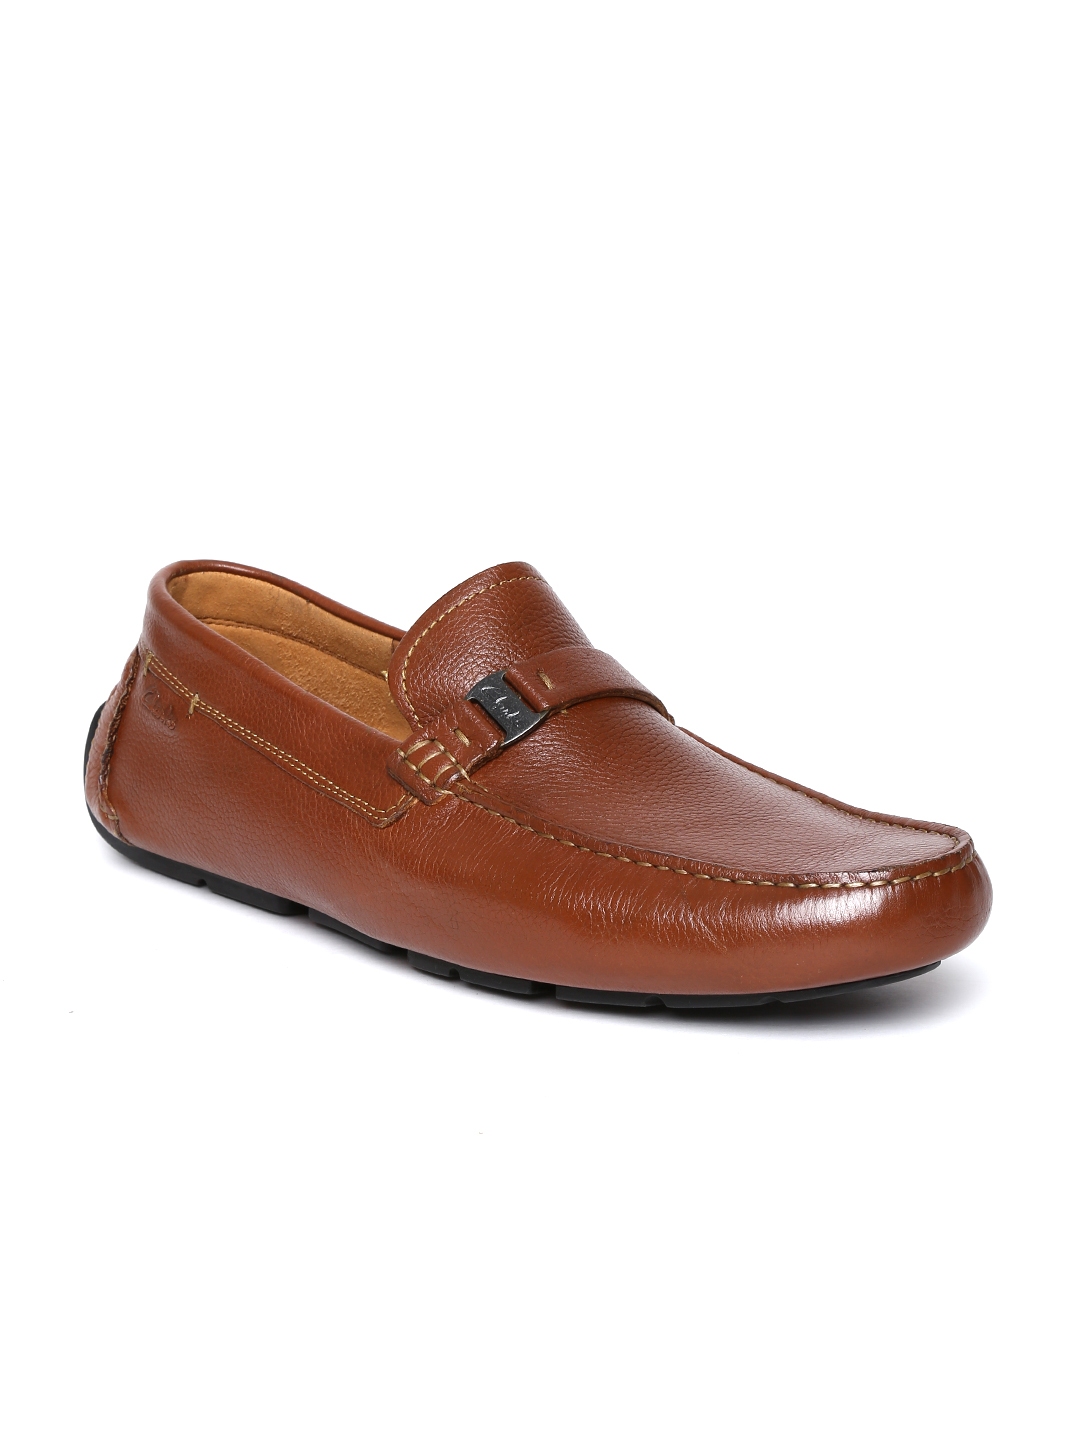 Buy Clarks Men Brown Leather Loafers - Casual Shoes for Men 951675 | Myntra